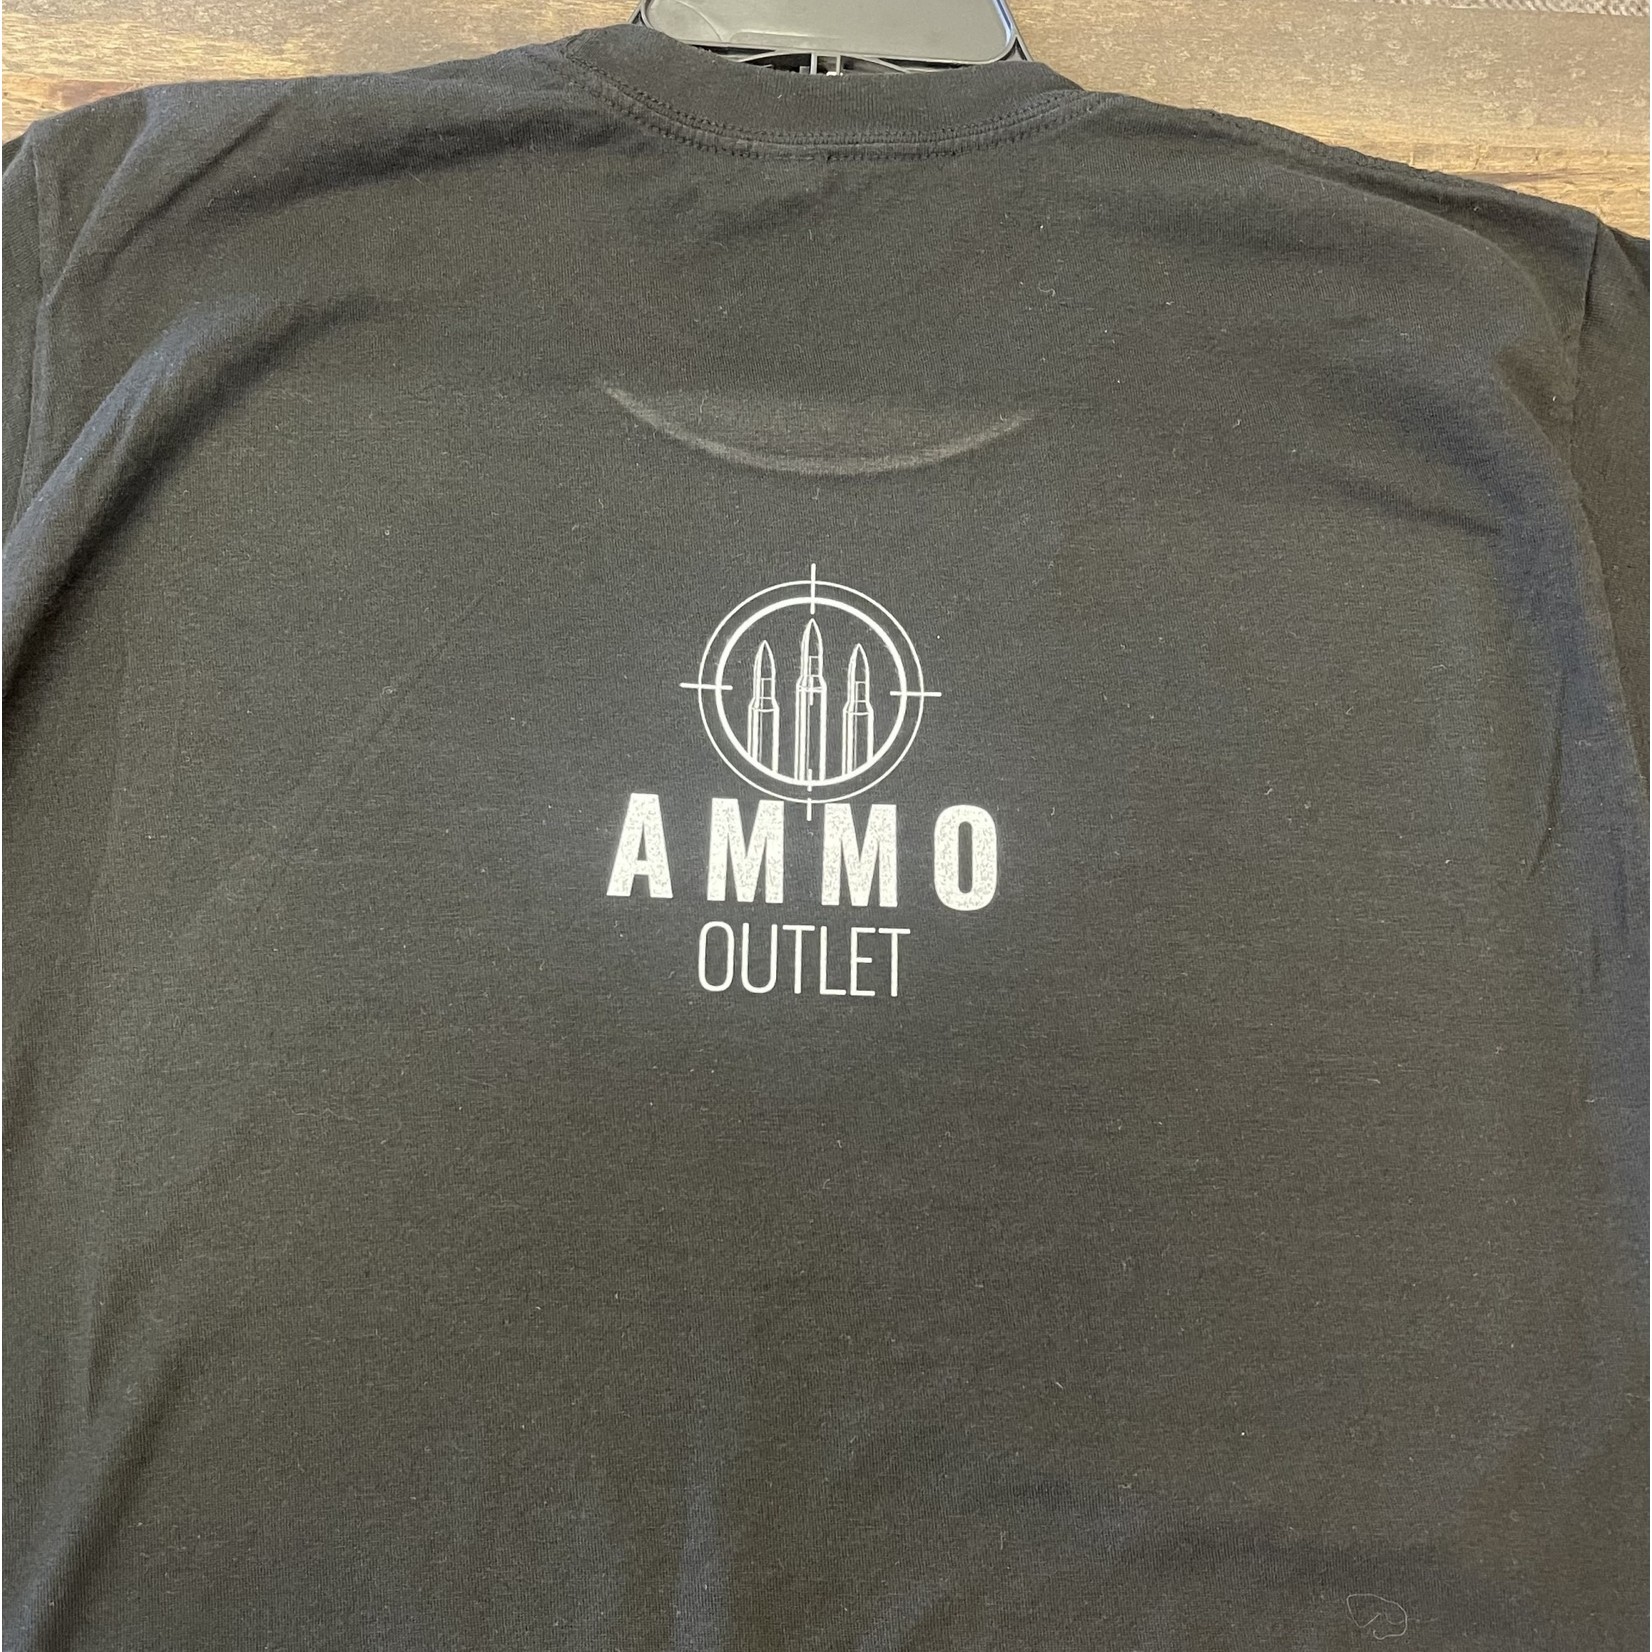 Ammo Outlet 7.62x39 T-Shirt